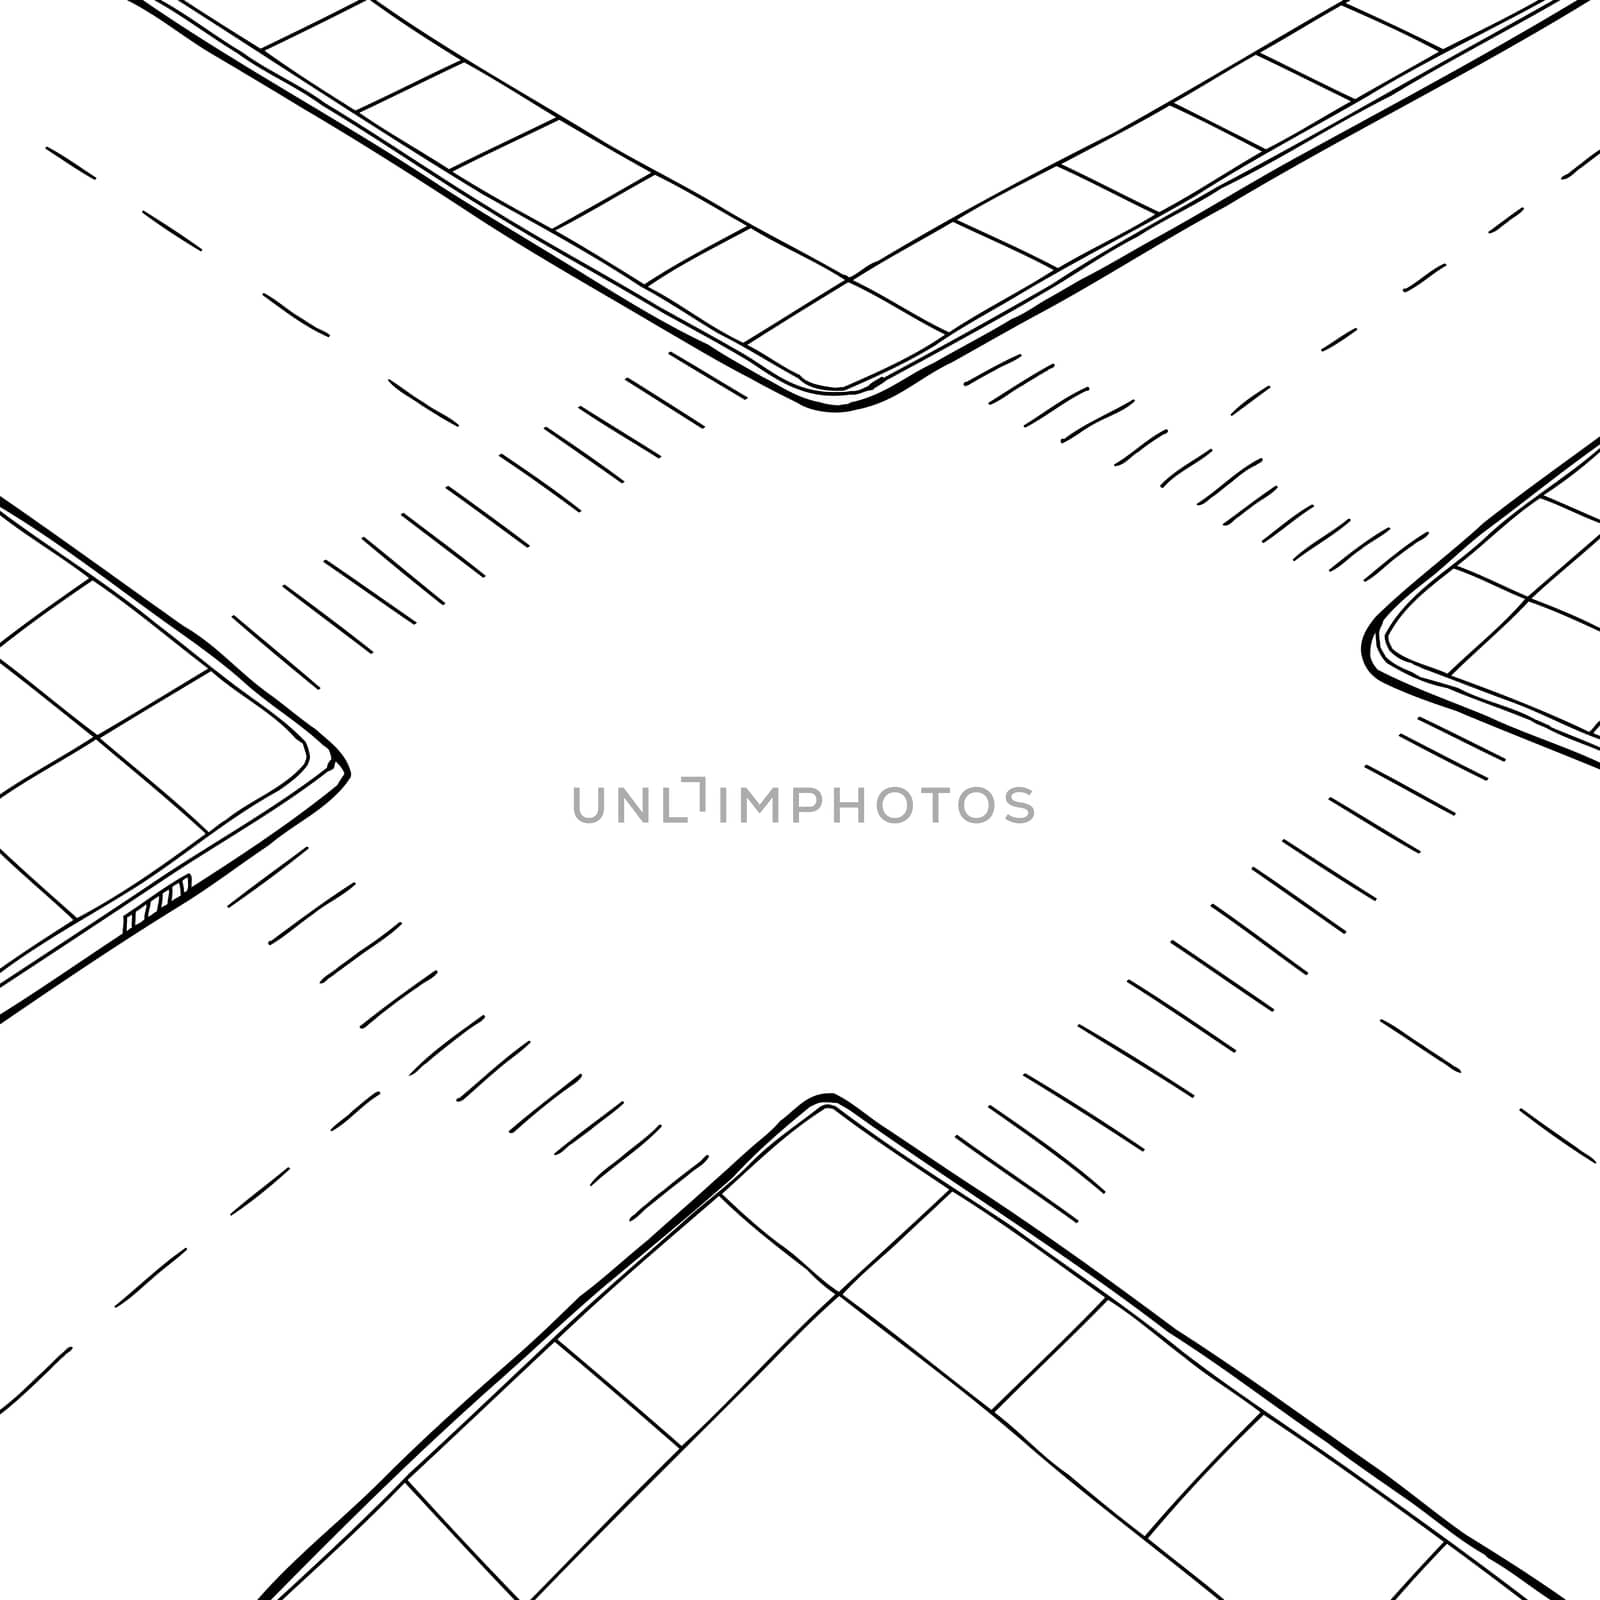 Outlined Intersection by TheBlackRhino